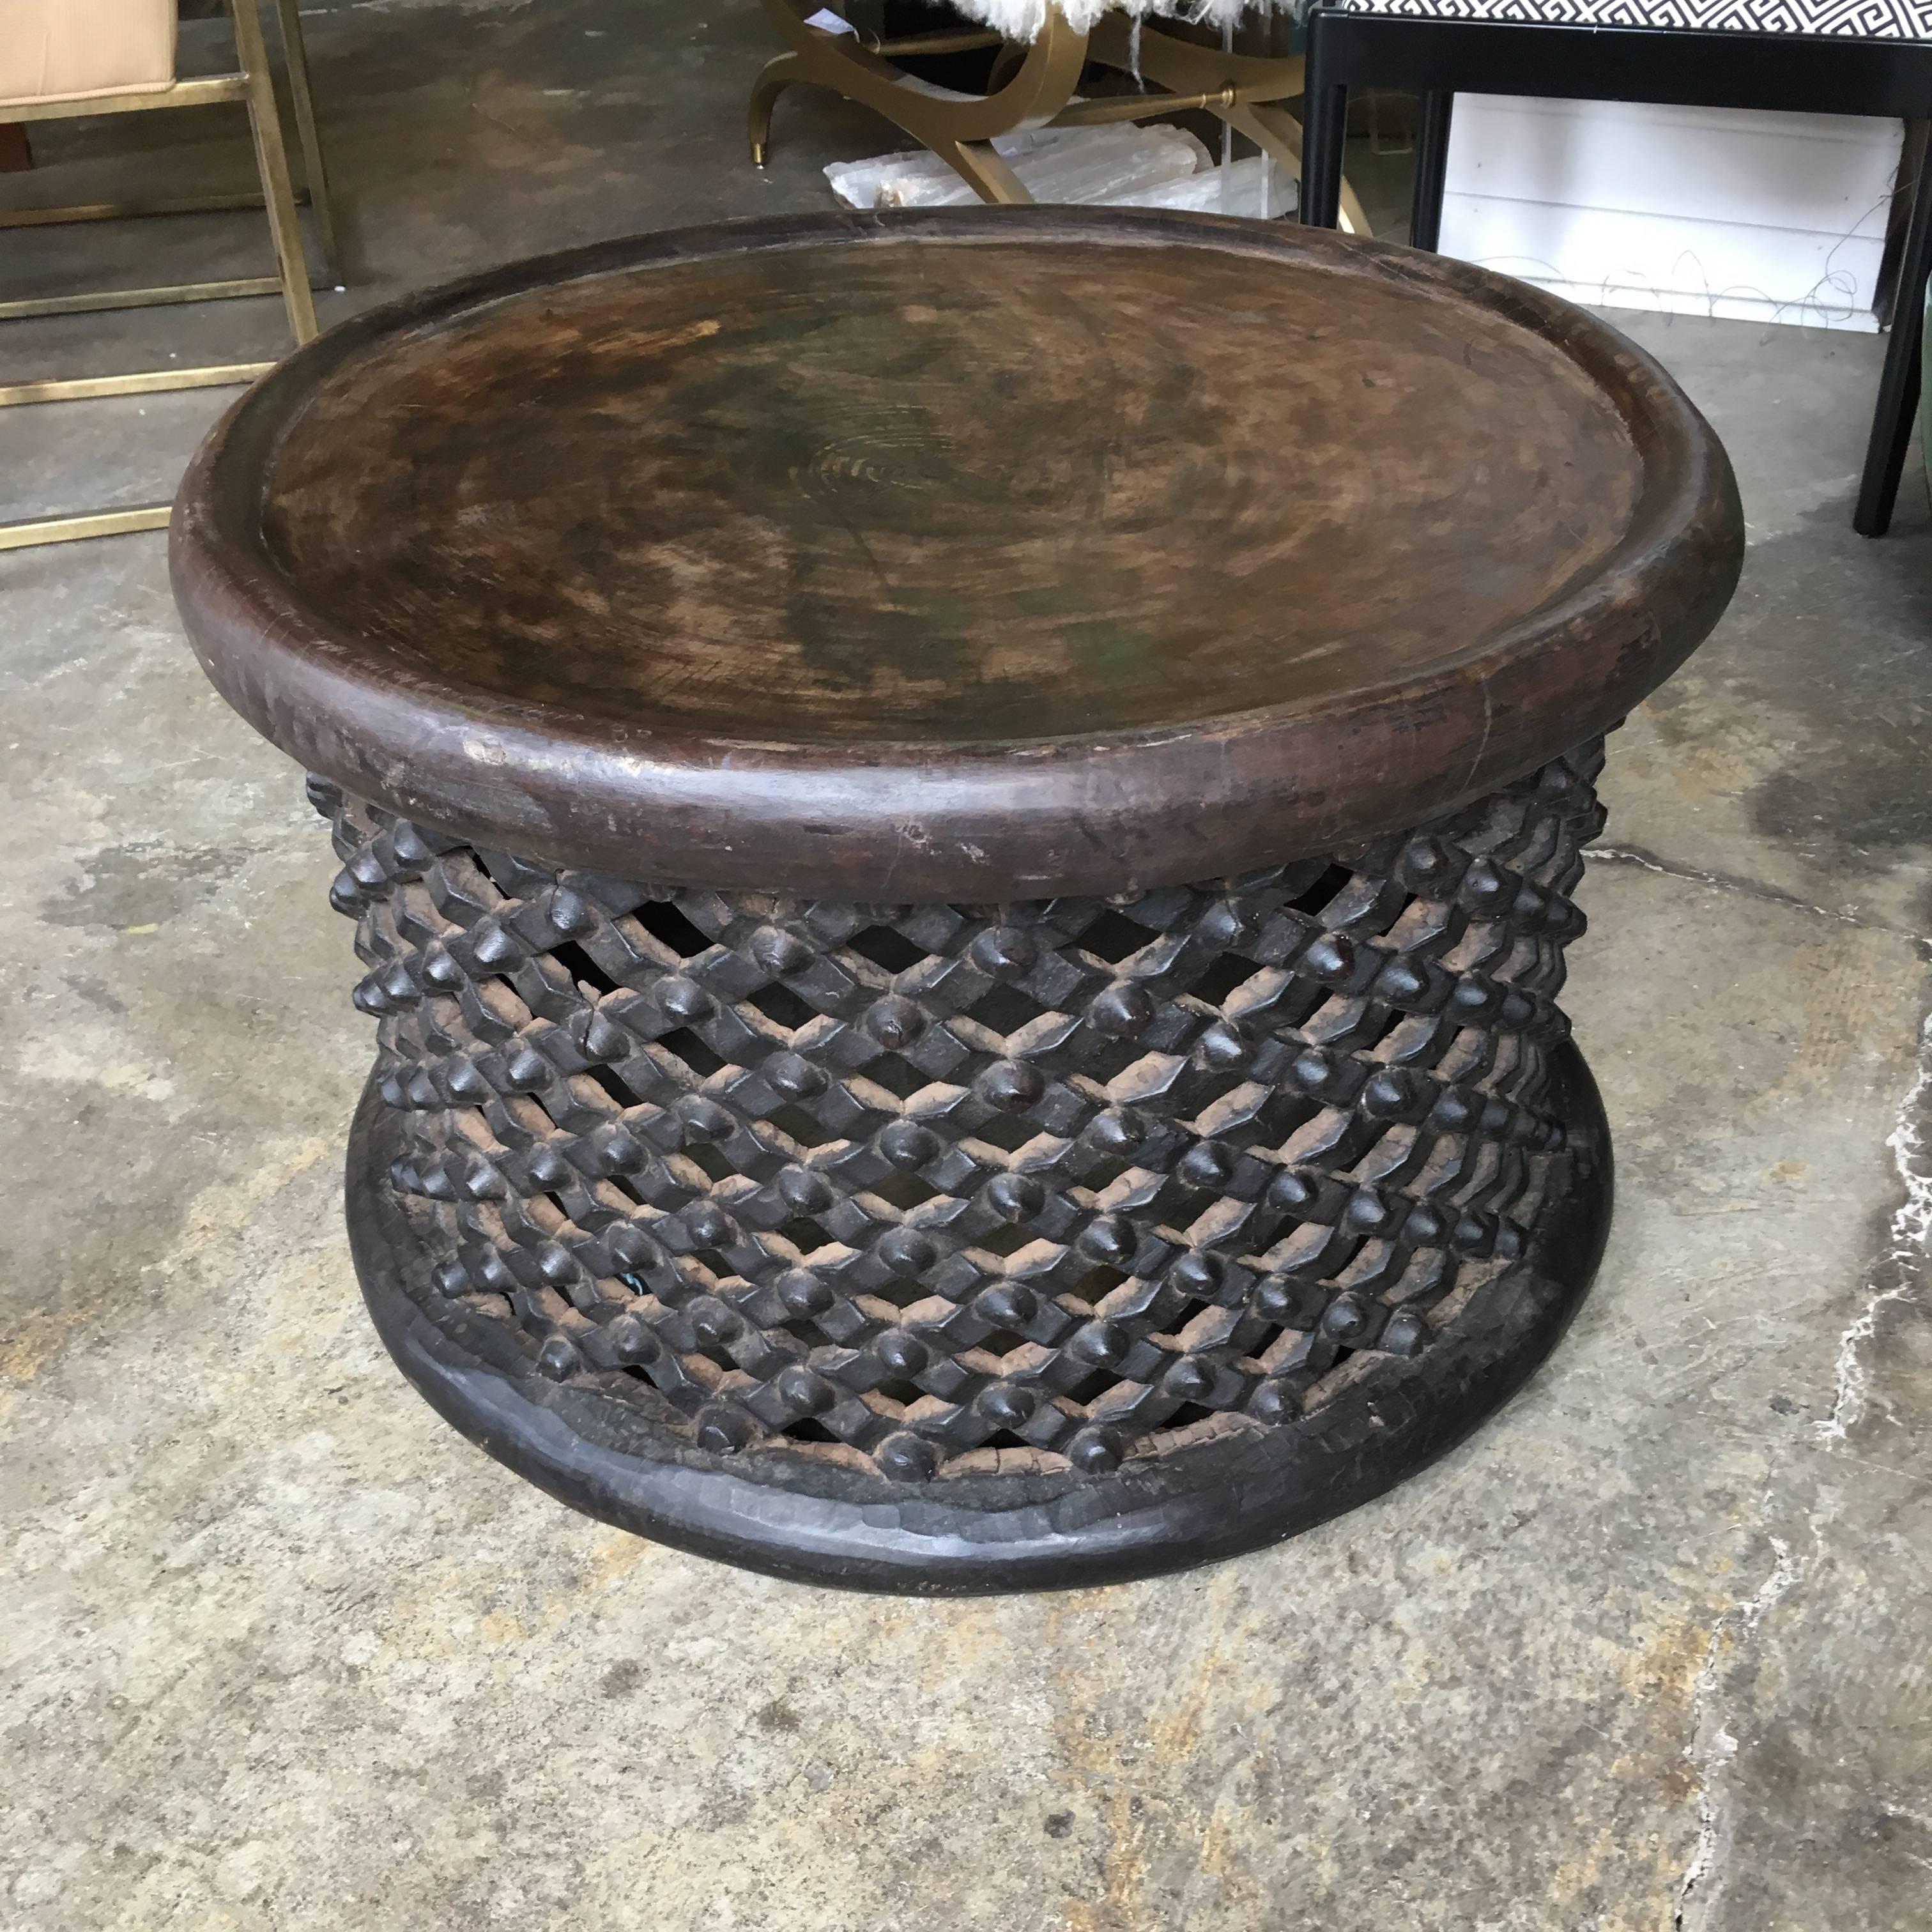 A hand-carved Bamileke spider table or stool carved from one piece of wood.